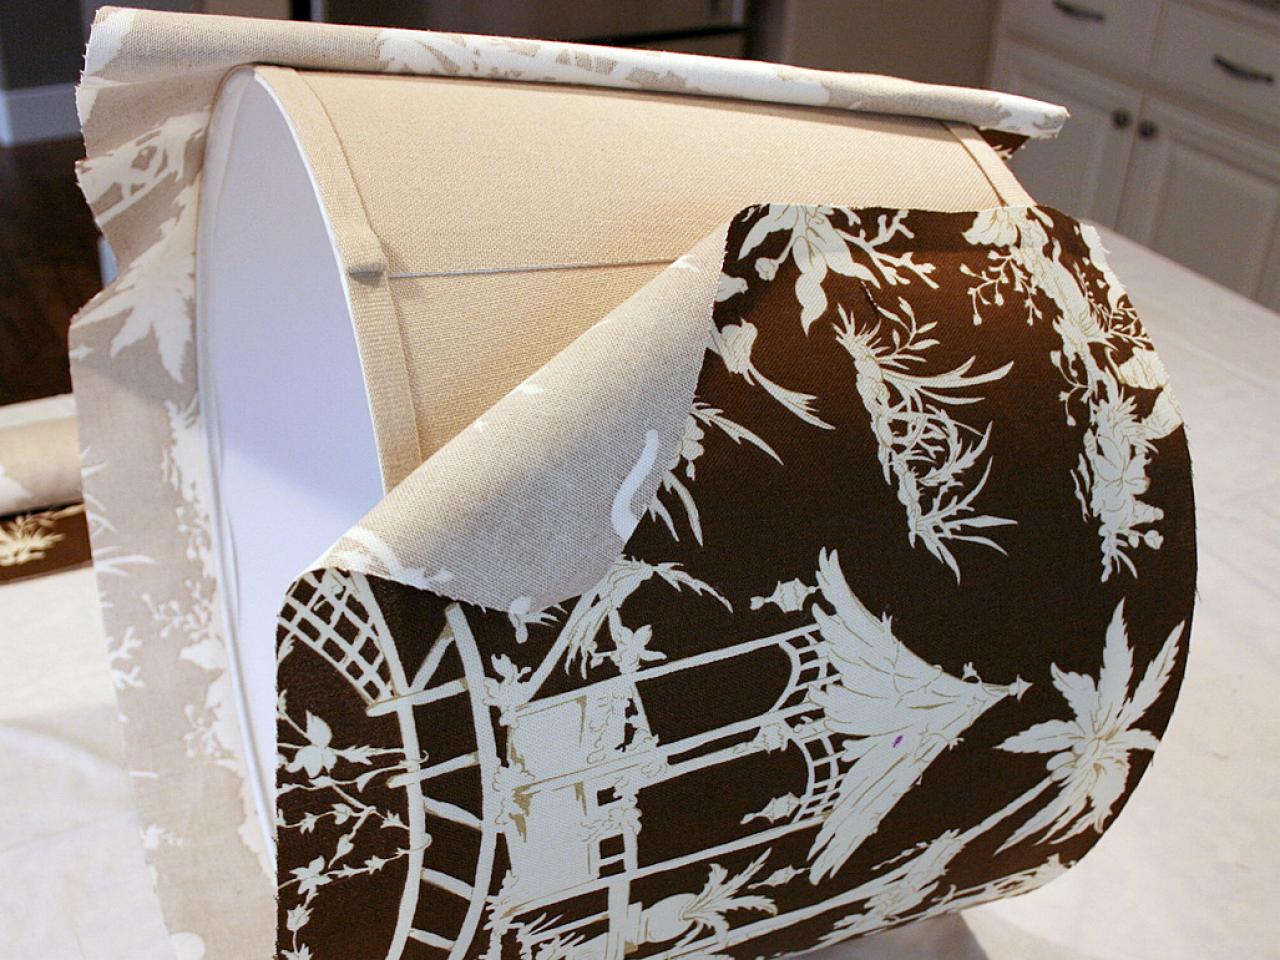 Custom Fabric Covered Lampshade, What Type Of Fabric To Cover Lampshade